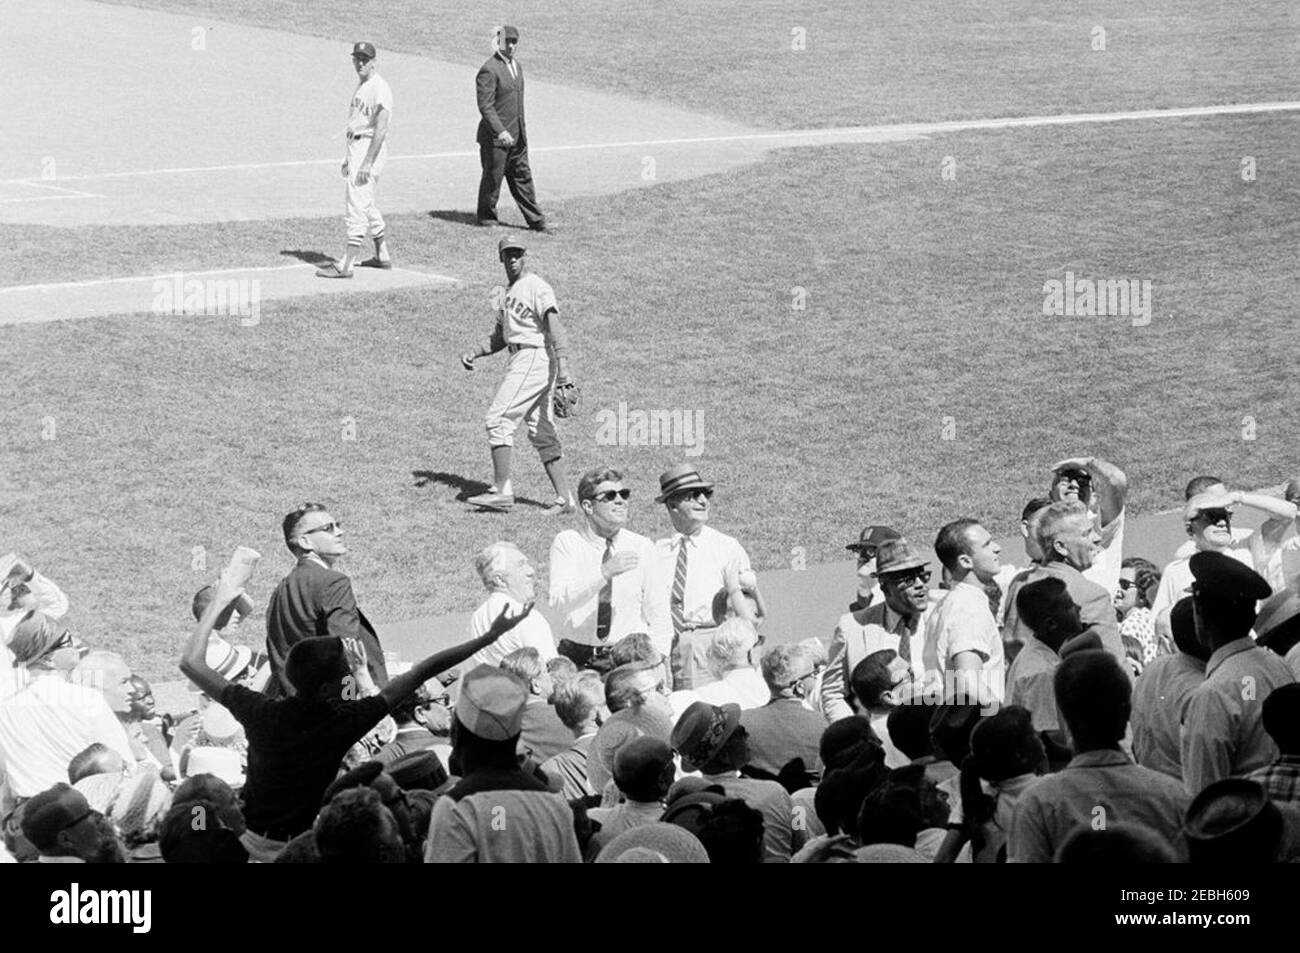 1962 All Star Baseball Game at D.C. Stadium, 12:52PM. President John F. Kennedy (wearing sunglasses) and others watch the 32nd Major League Baseball (MLB) All-Star Game at D.C. Stadium, Washington, D.C. First baseman for the National League, Ernie Banks (Chicago Cubs), and first base coach for the American League, James Barton u0022Mickeyu0022 Vernon (manager of the Washington Senators), stand on the field in background. Also pictured (in the stands): Commissioner of Baseball, Ford C. Frick; Special Assistant to the President, Dave Powers; Associate Press Secretary, Andrew T. Hatcher; member Stock Photo